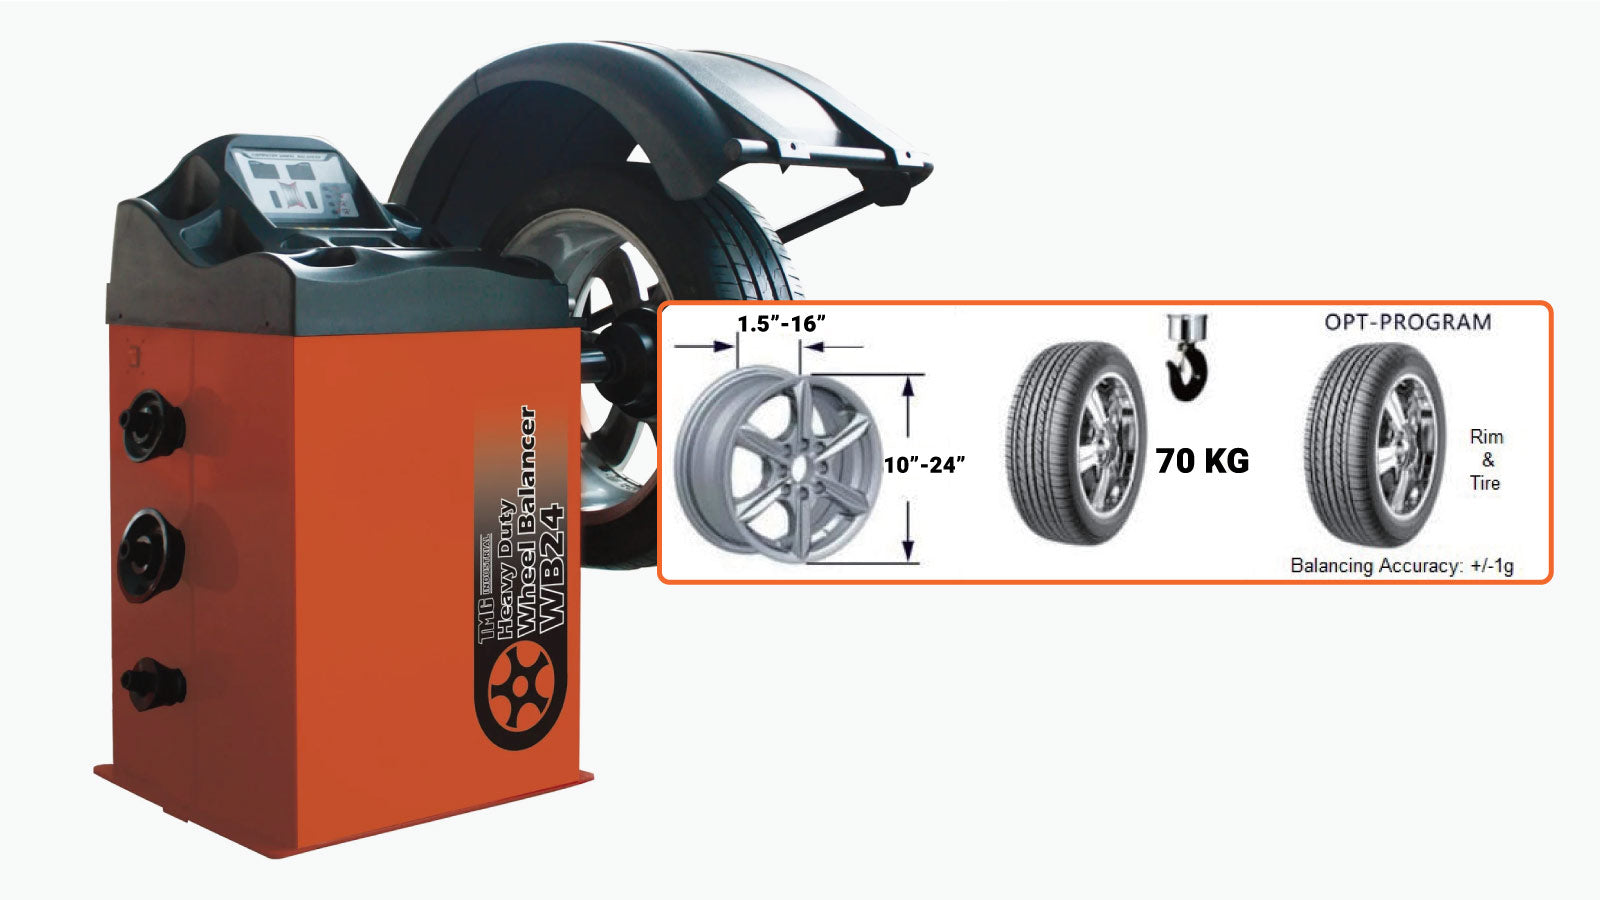 TMG Industrial Self-Calibrating Wheel Balancer with Protection Hood, 10”-24” Rim Diameter, Computerized, +/- 1 g of Accuracy, ALU Balancing Modes, TMG-WB24H-specifications-image